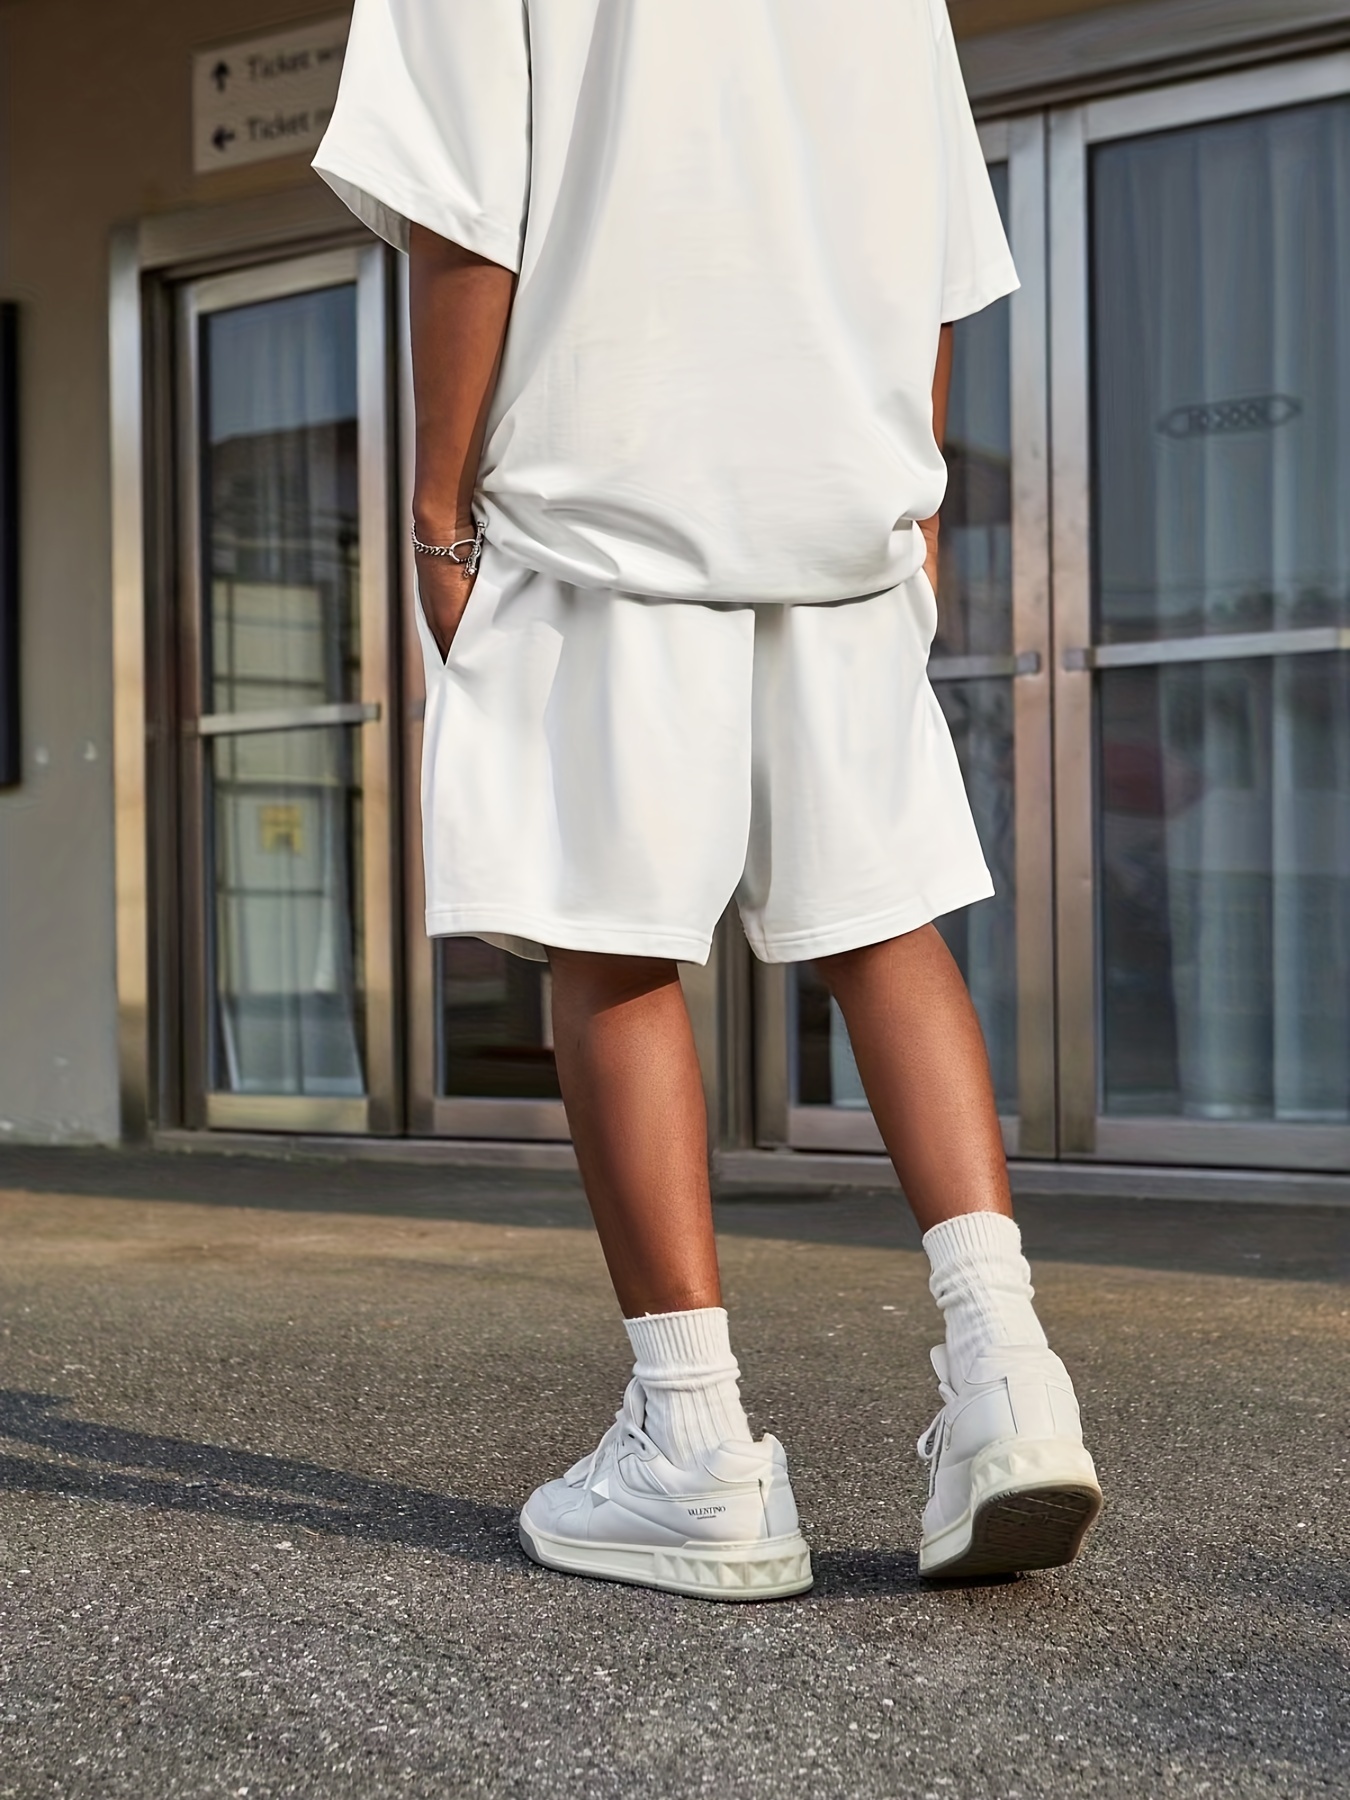 Air force 1 summer outfits (Shorts) (All white) 